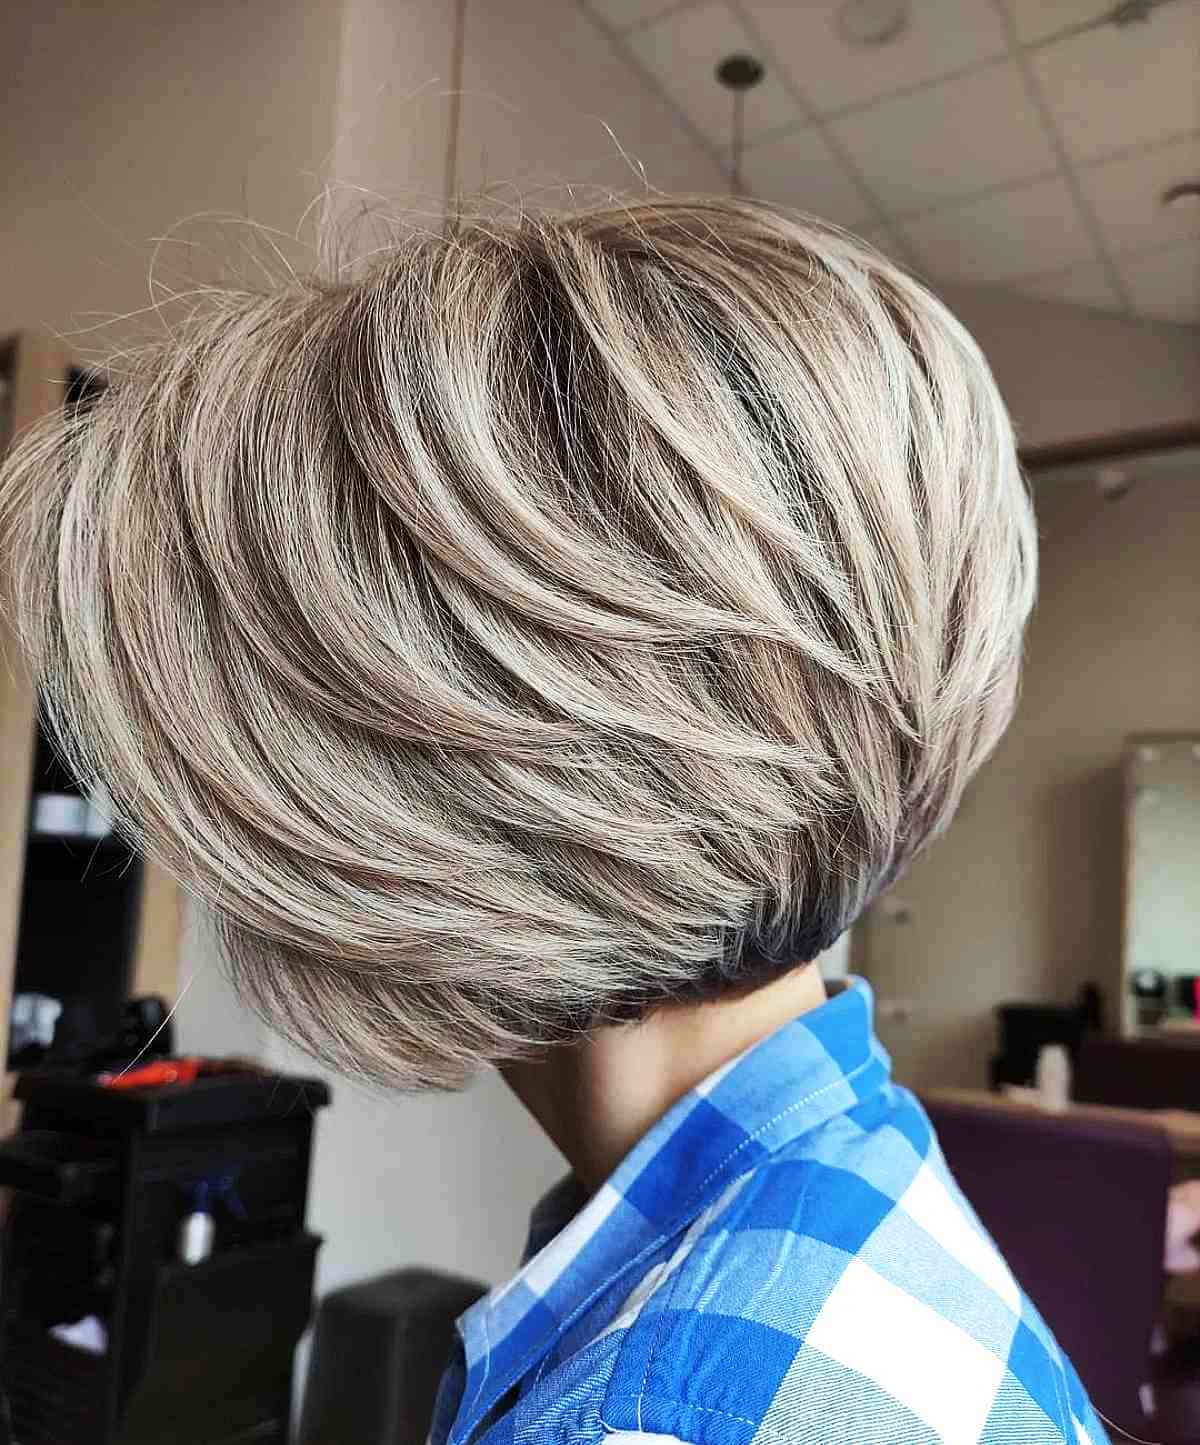 A layered blonde pixie bob with darker root is a cool solution if you want a lot of dimension